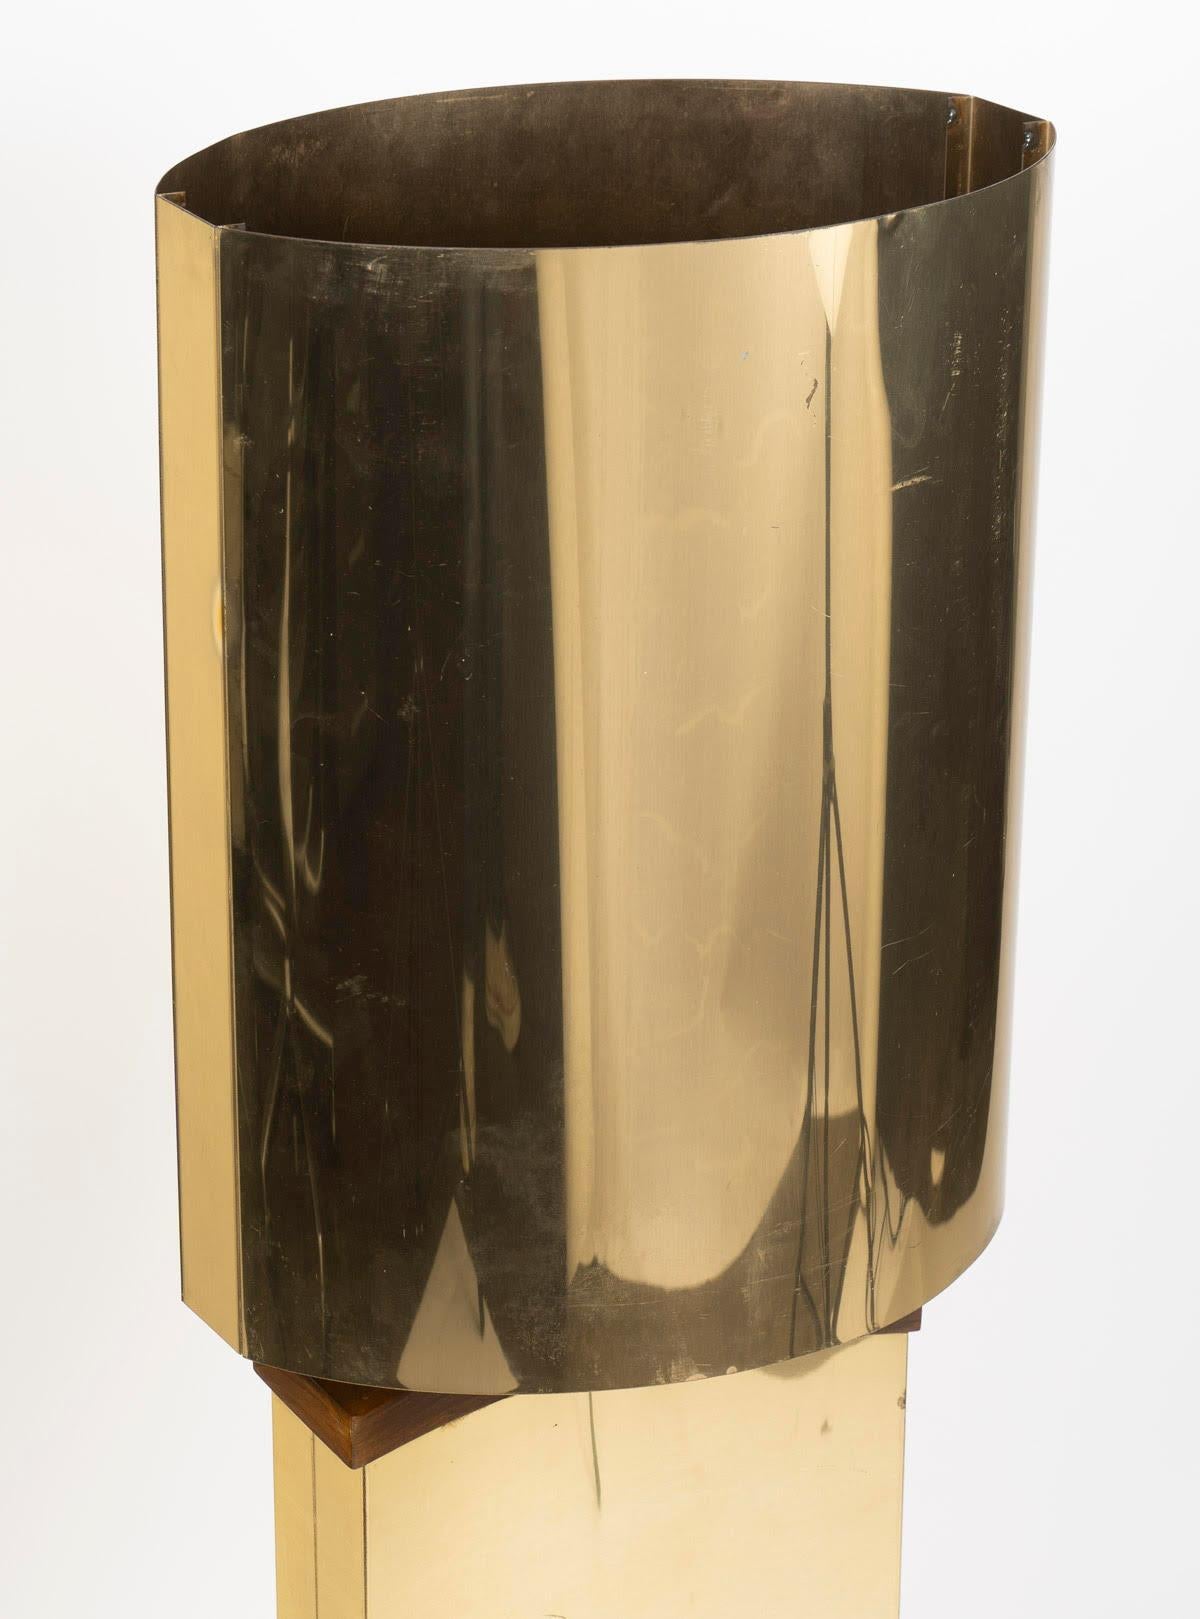 Brass and wood table lamp from the 1970s.

Brass and wood table lamp from the 1970s, with minor scratches and oxidation.  
h: 110cm, w: 37cm, d: 27.5cm
